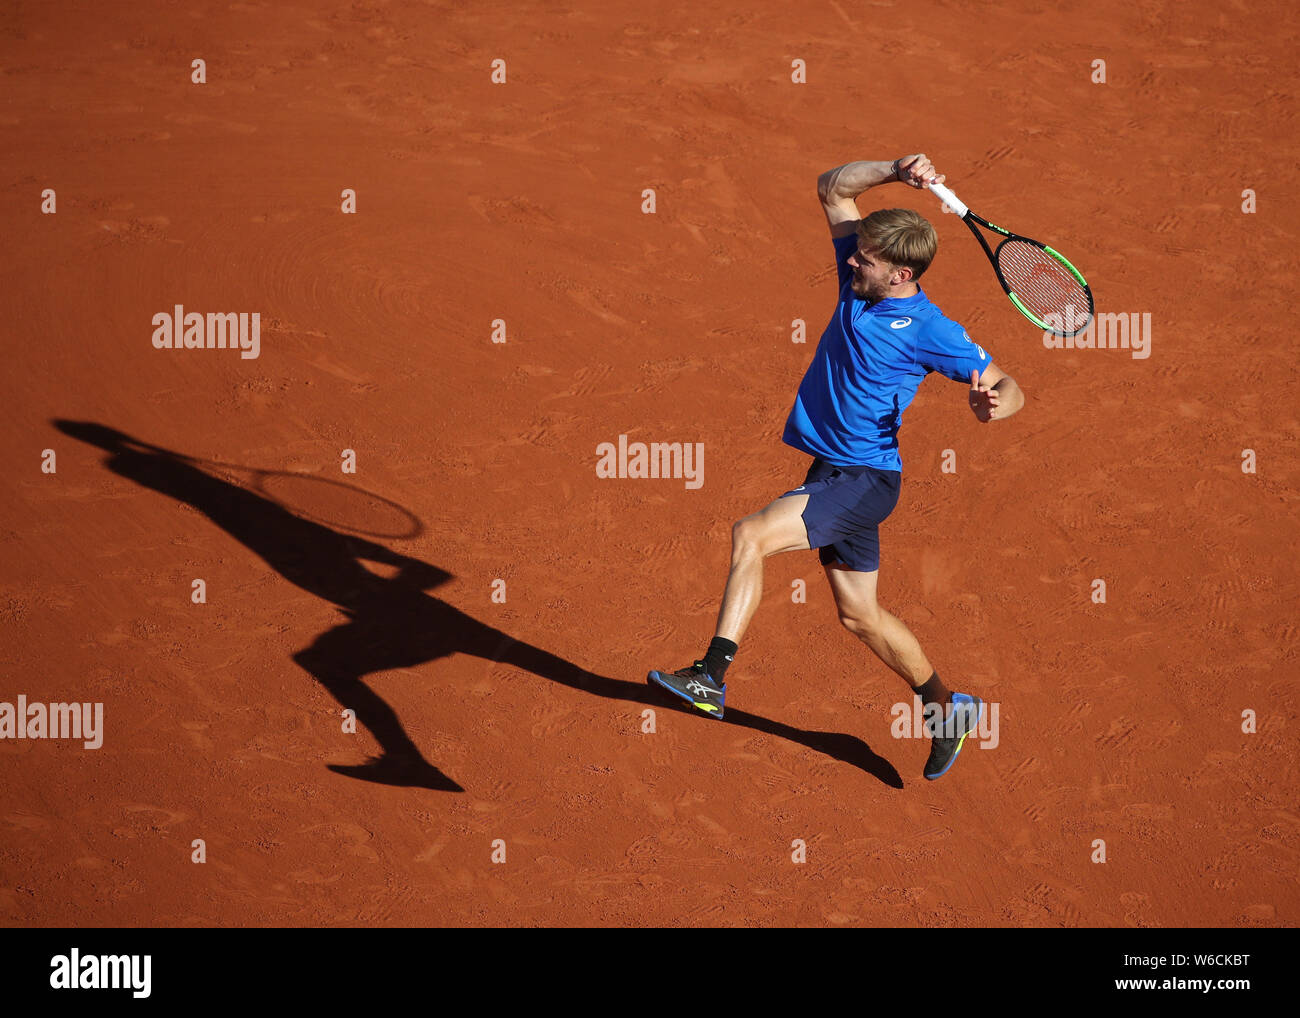 Belgian  tennis player David Goffin playing forehand shot in French Open 2019 tournament, Paris, France Stock Photo